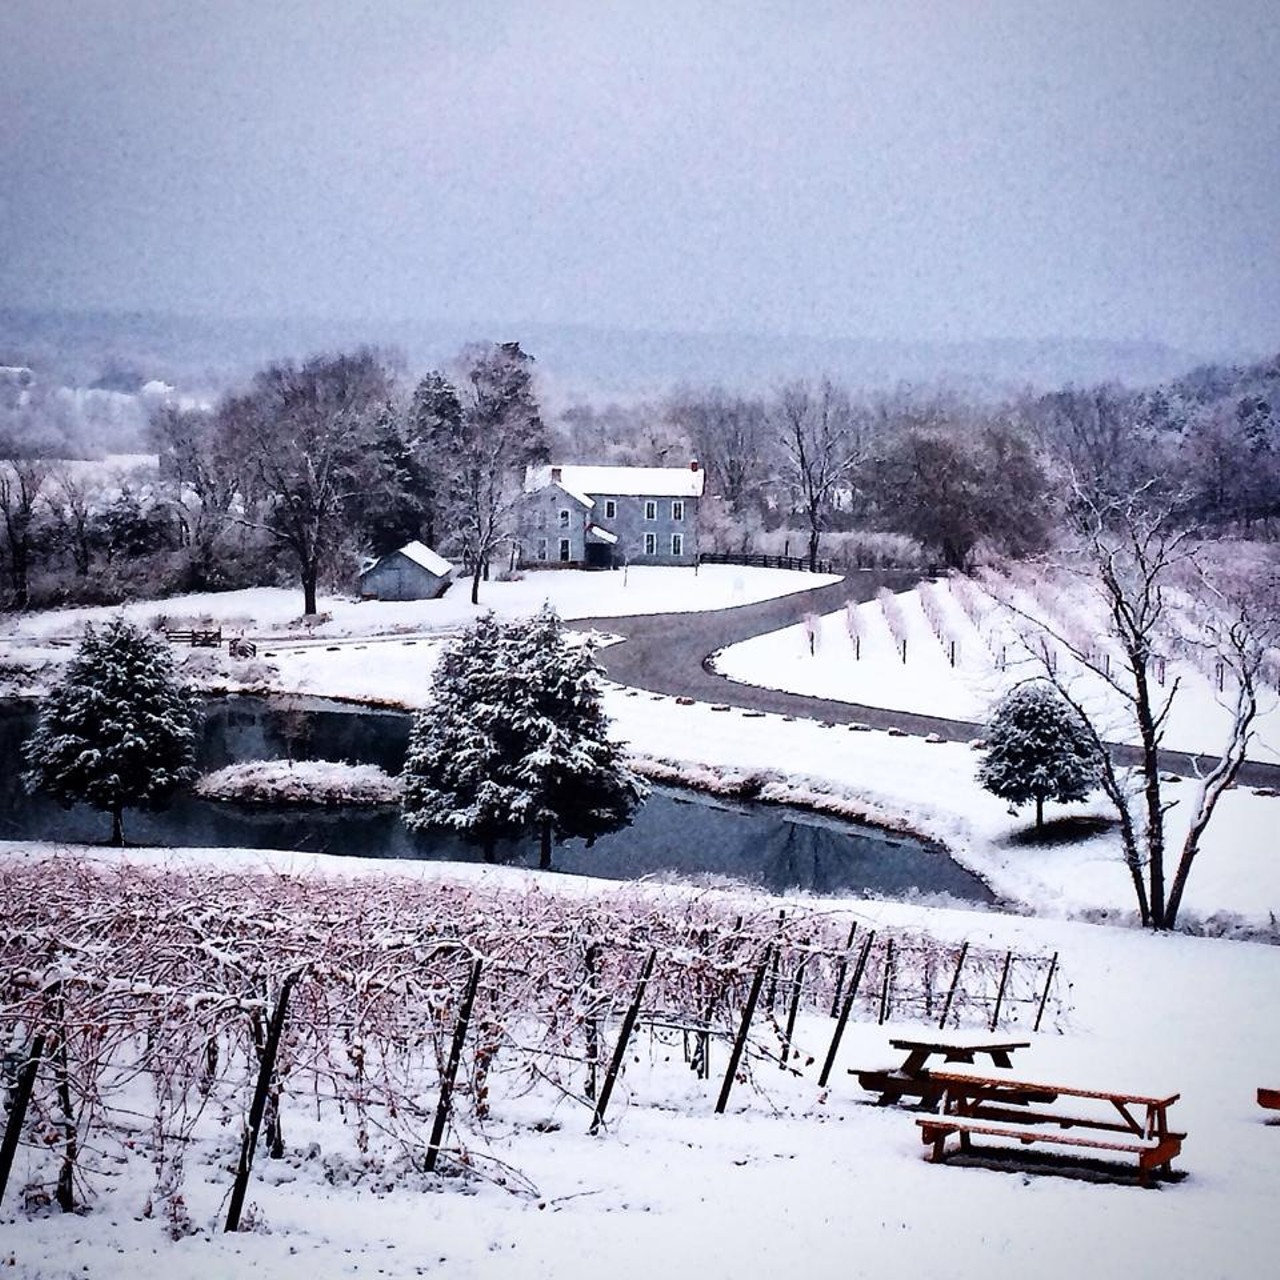 Sip some wine at one of the area's beautiful wineries.
Why only give our nearby wineries love during the summer and fall? These places are an experience in the winter as well -- just look at how gorgeous Chandler Hill Vineyards (596 Defiance Road, Defiance) looks covered in snow. Plus, wine tastes great all year round. Make a trip to Defiance, Augusta or Hermann and sip the day away. Photo courtesy of Chandler Hill Vineyards.